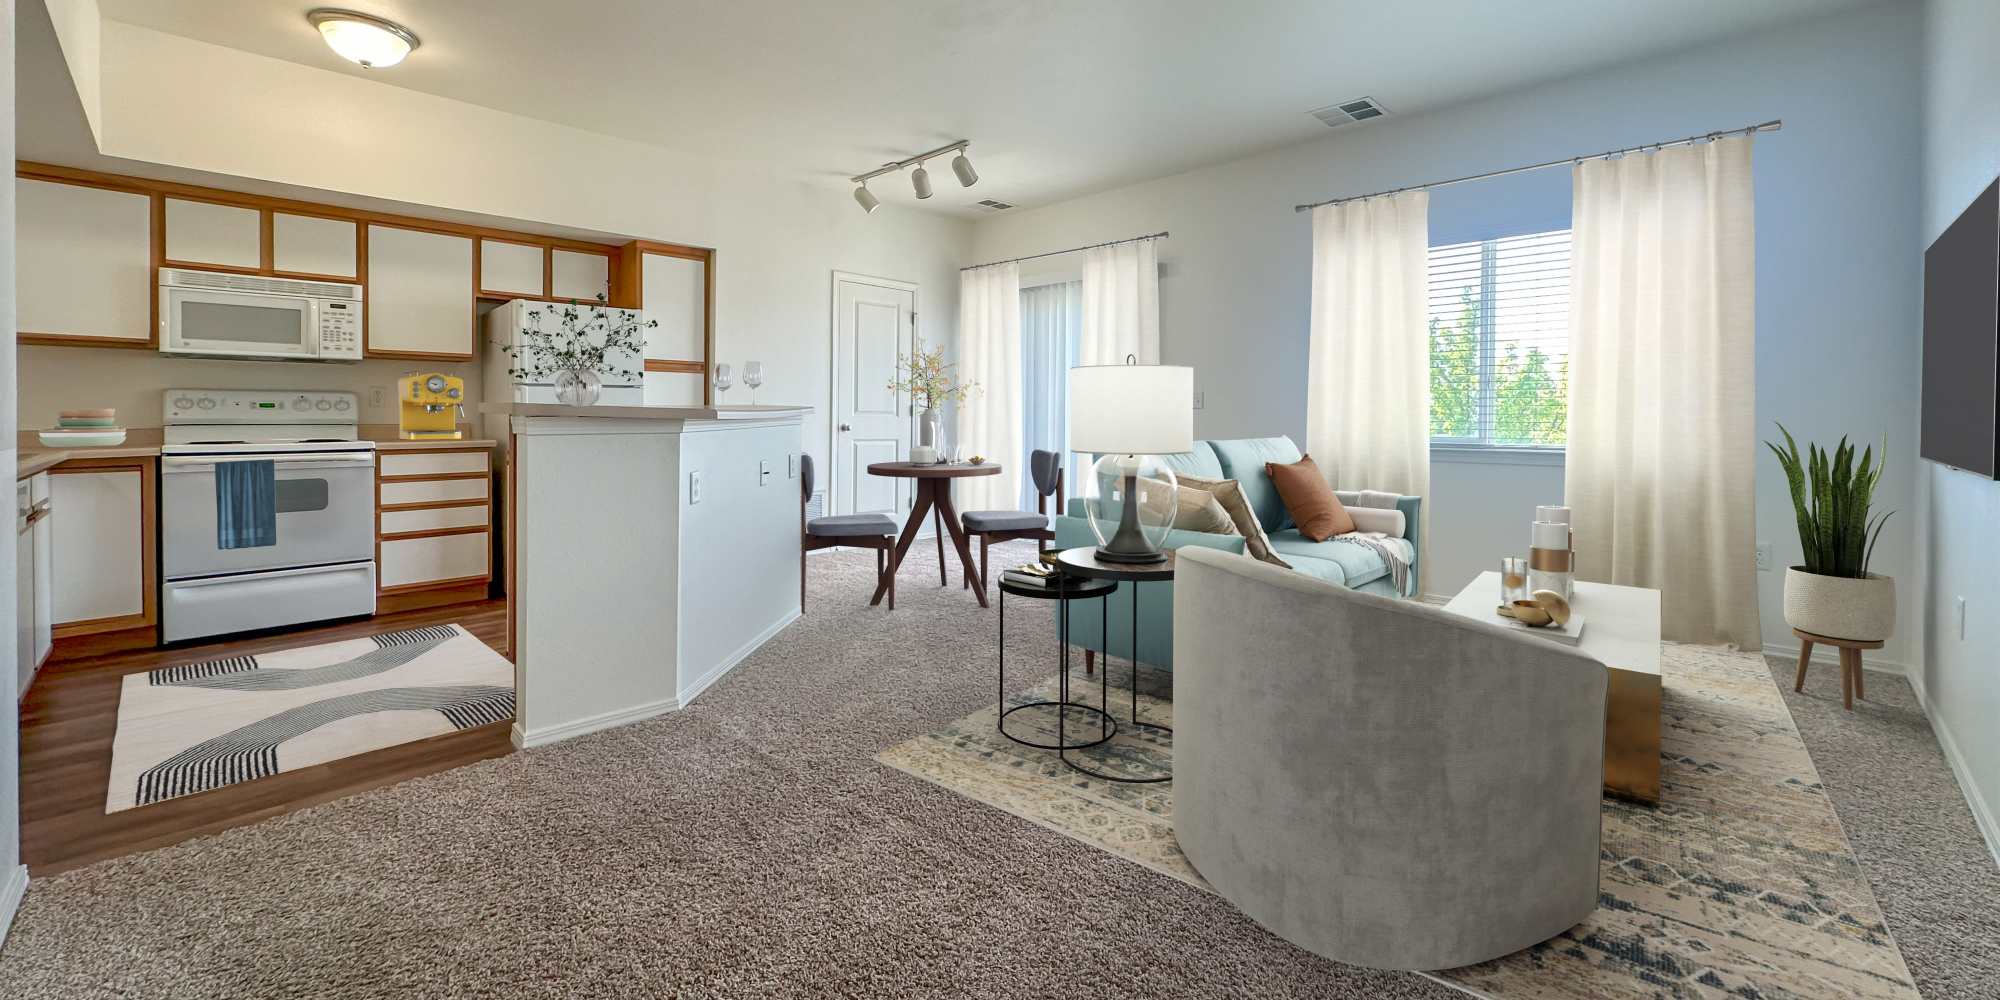 Living room and kitchen at Liberty Hill in Draper, Utah